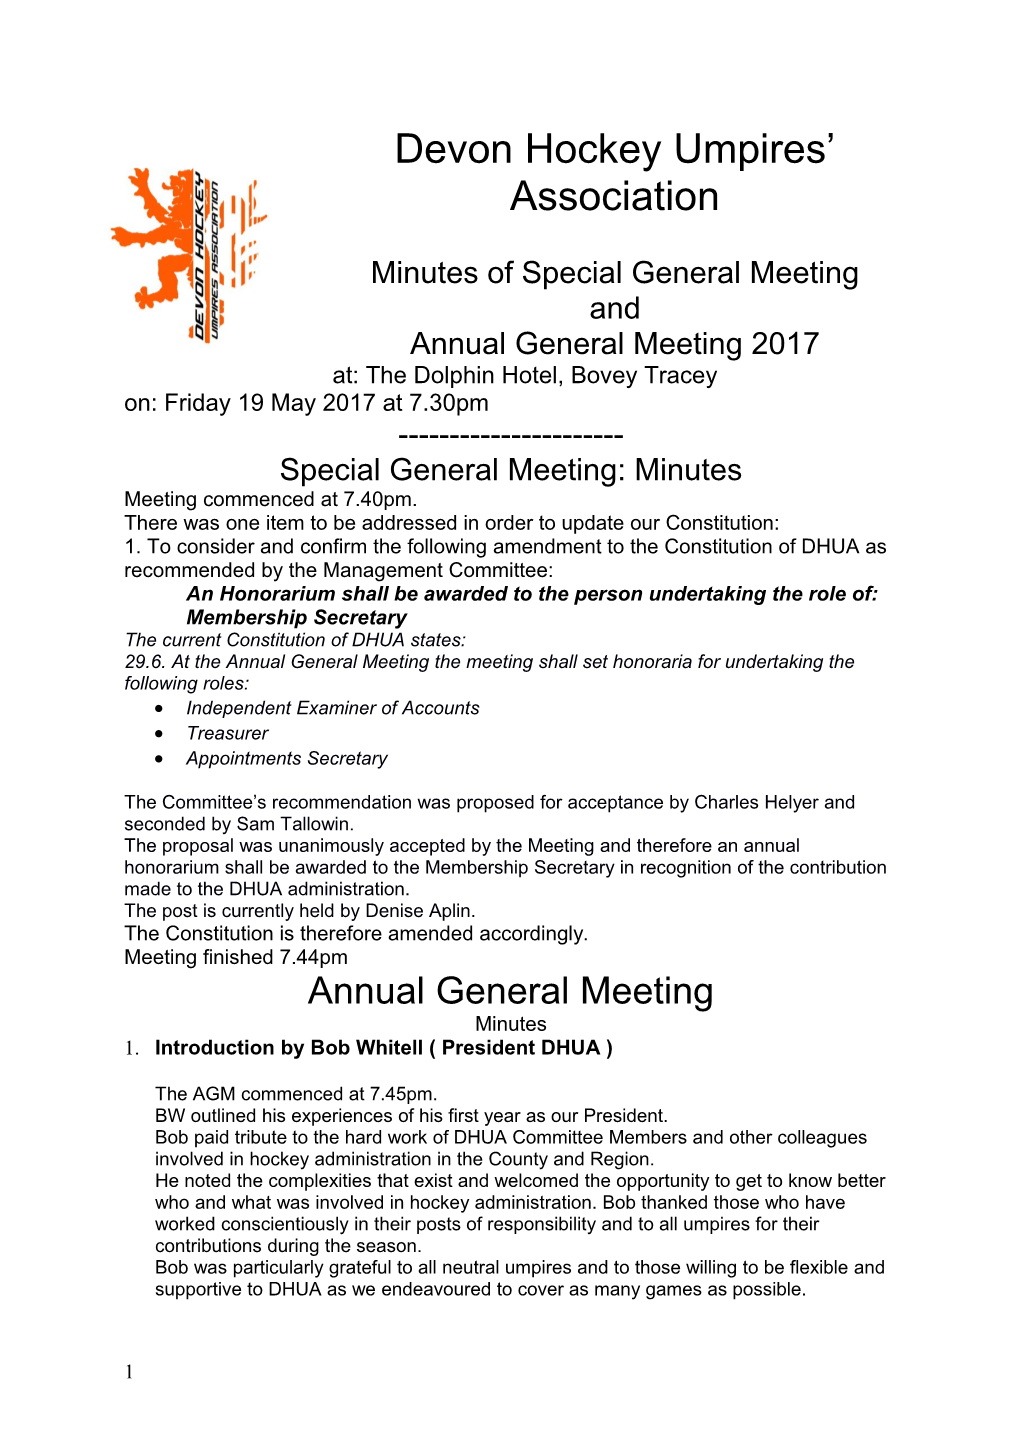 Minutes of Special General Meeting